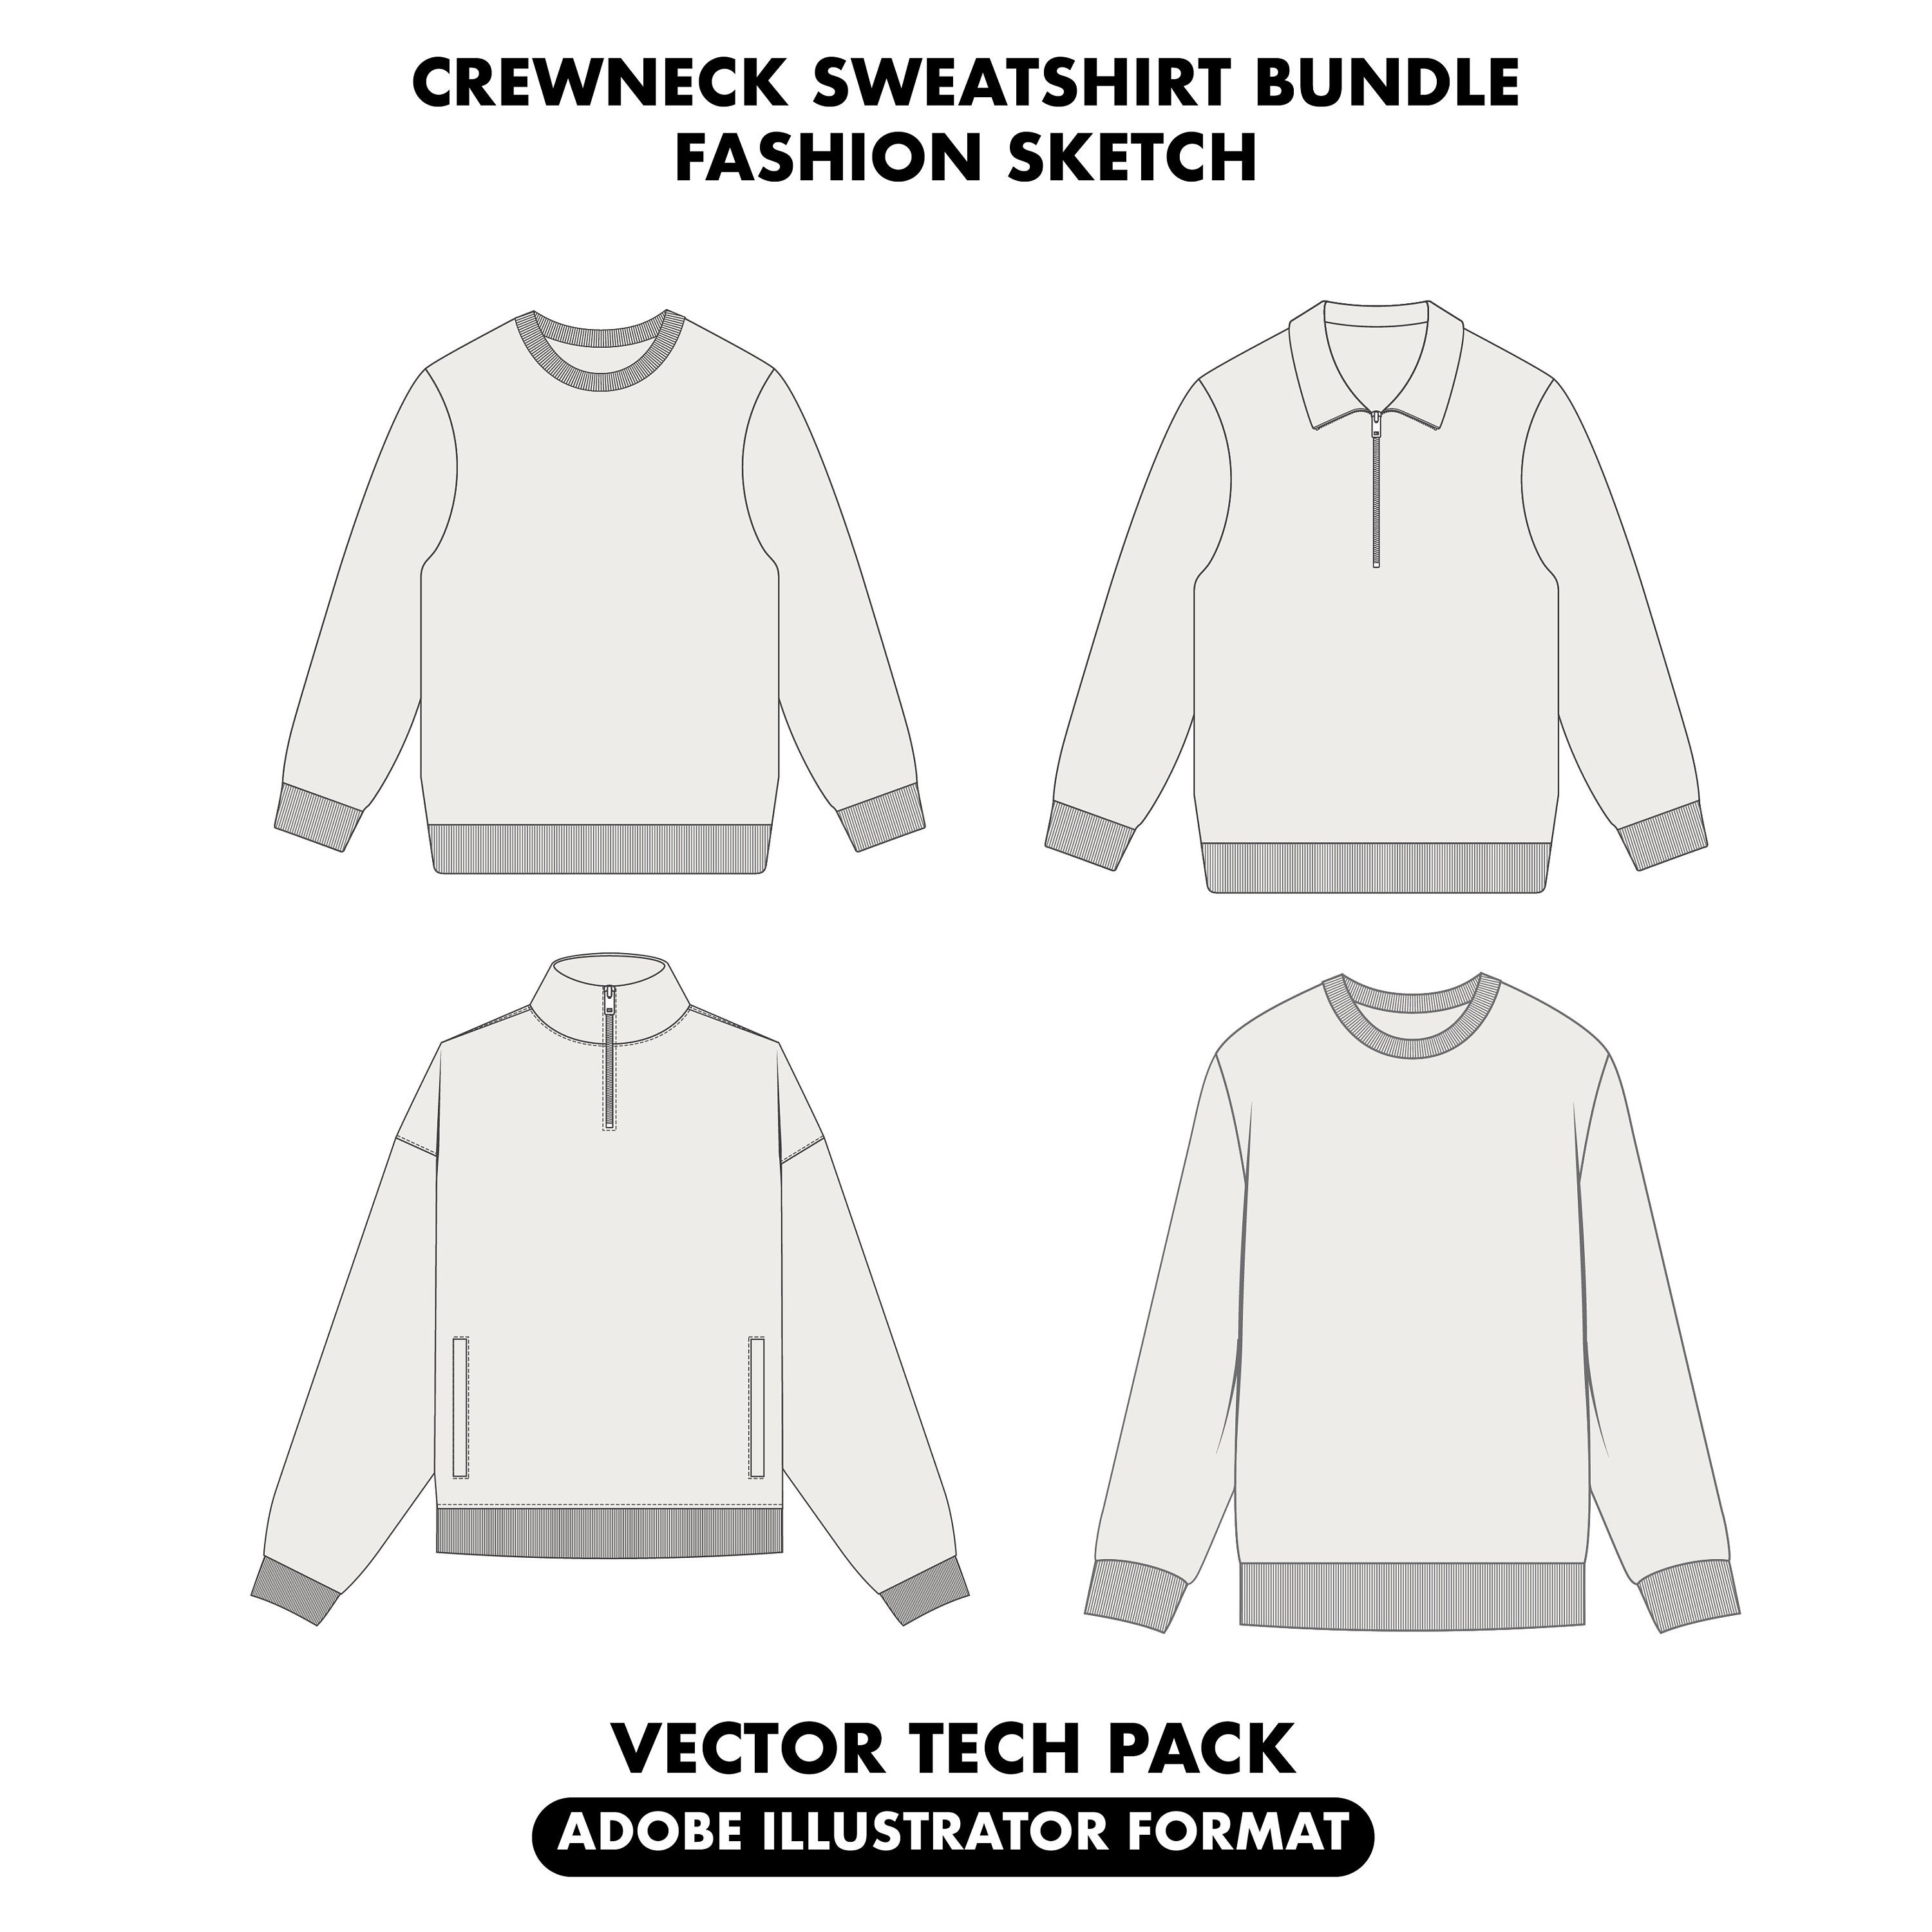 Jackets  Sweater Sketch  625x625 PNG Download  PNGkit